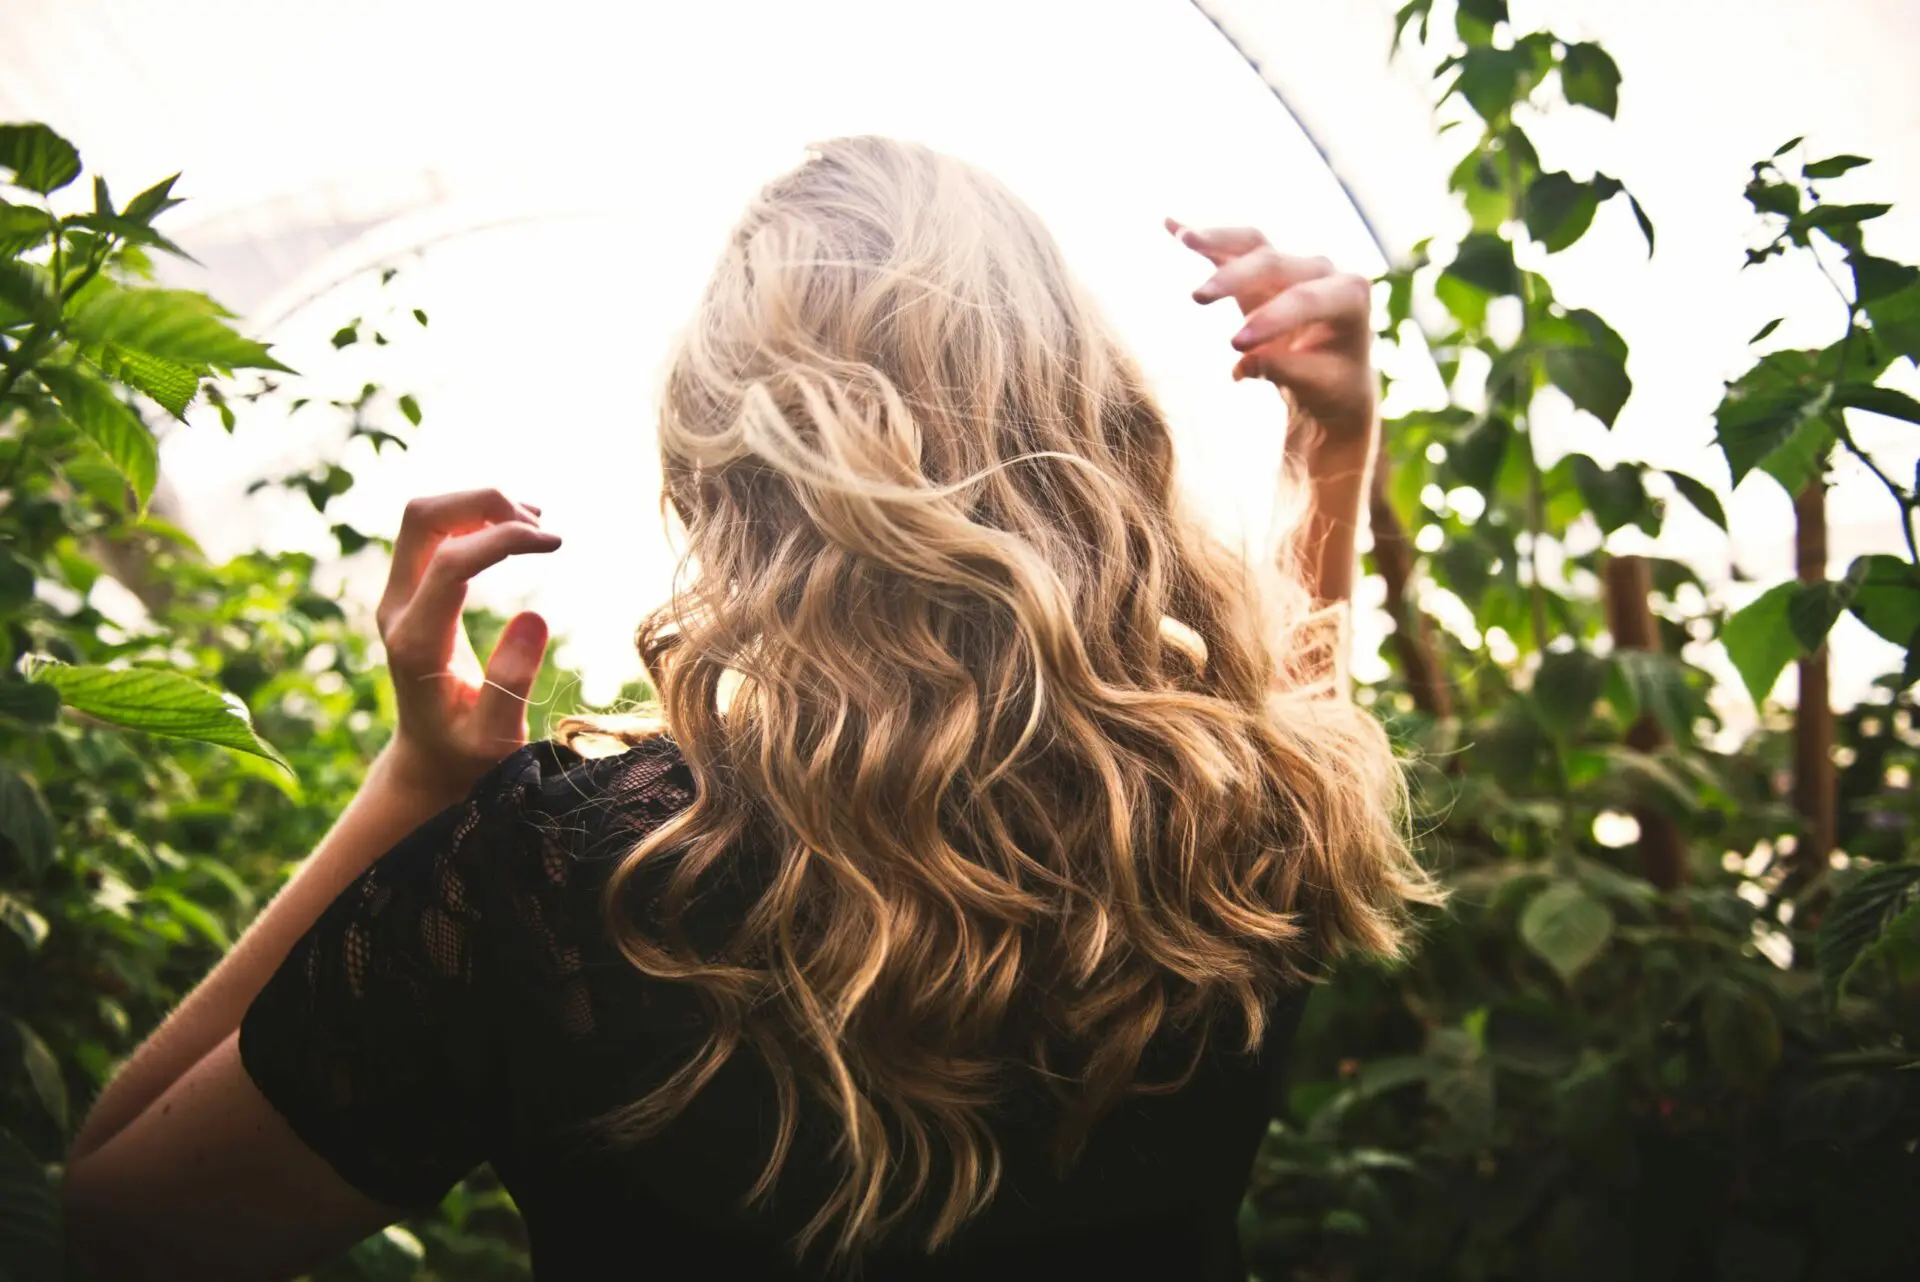 The Ultimate Guide to Organic, Non-Aerosol Dry Shampoos